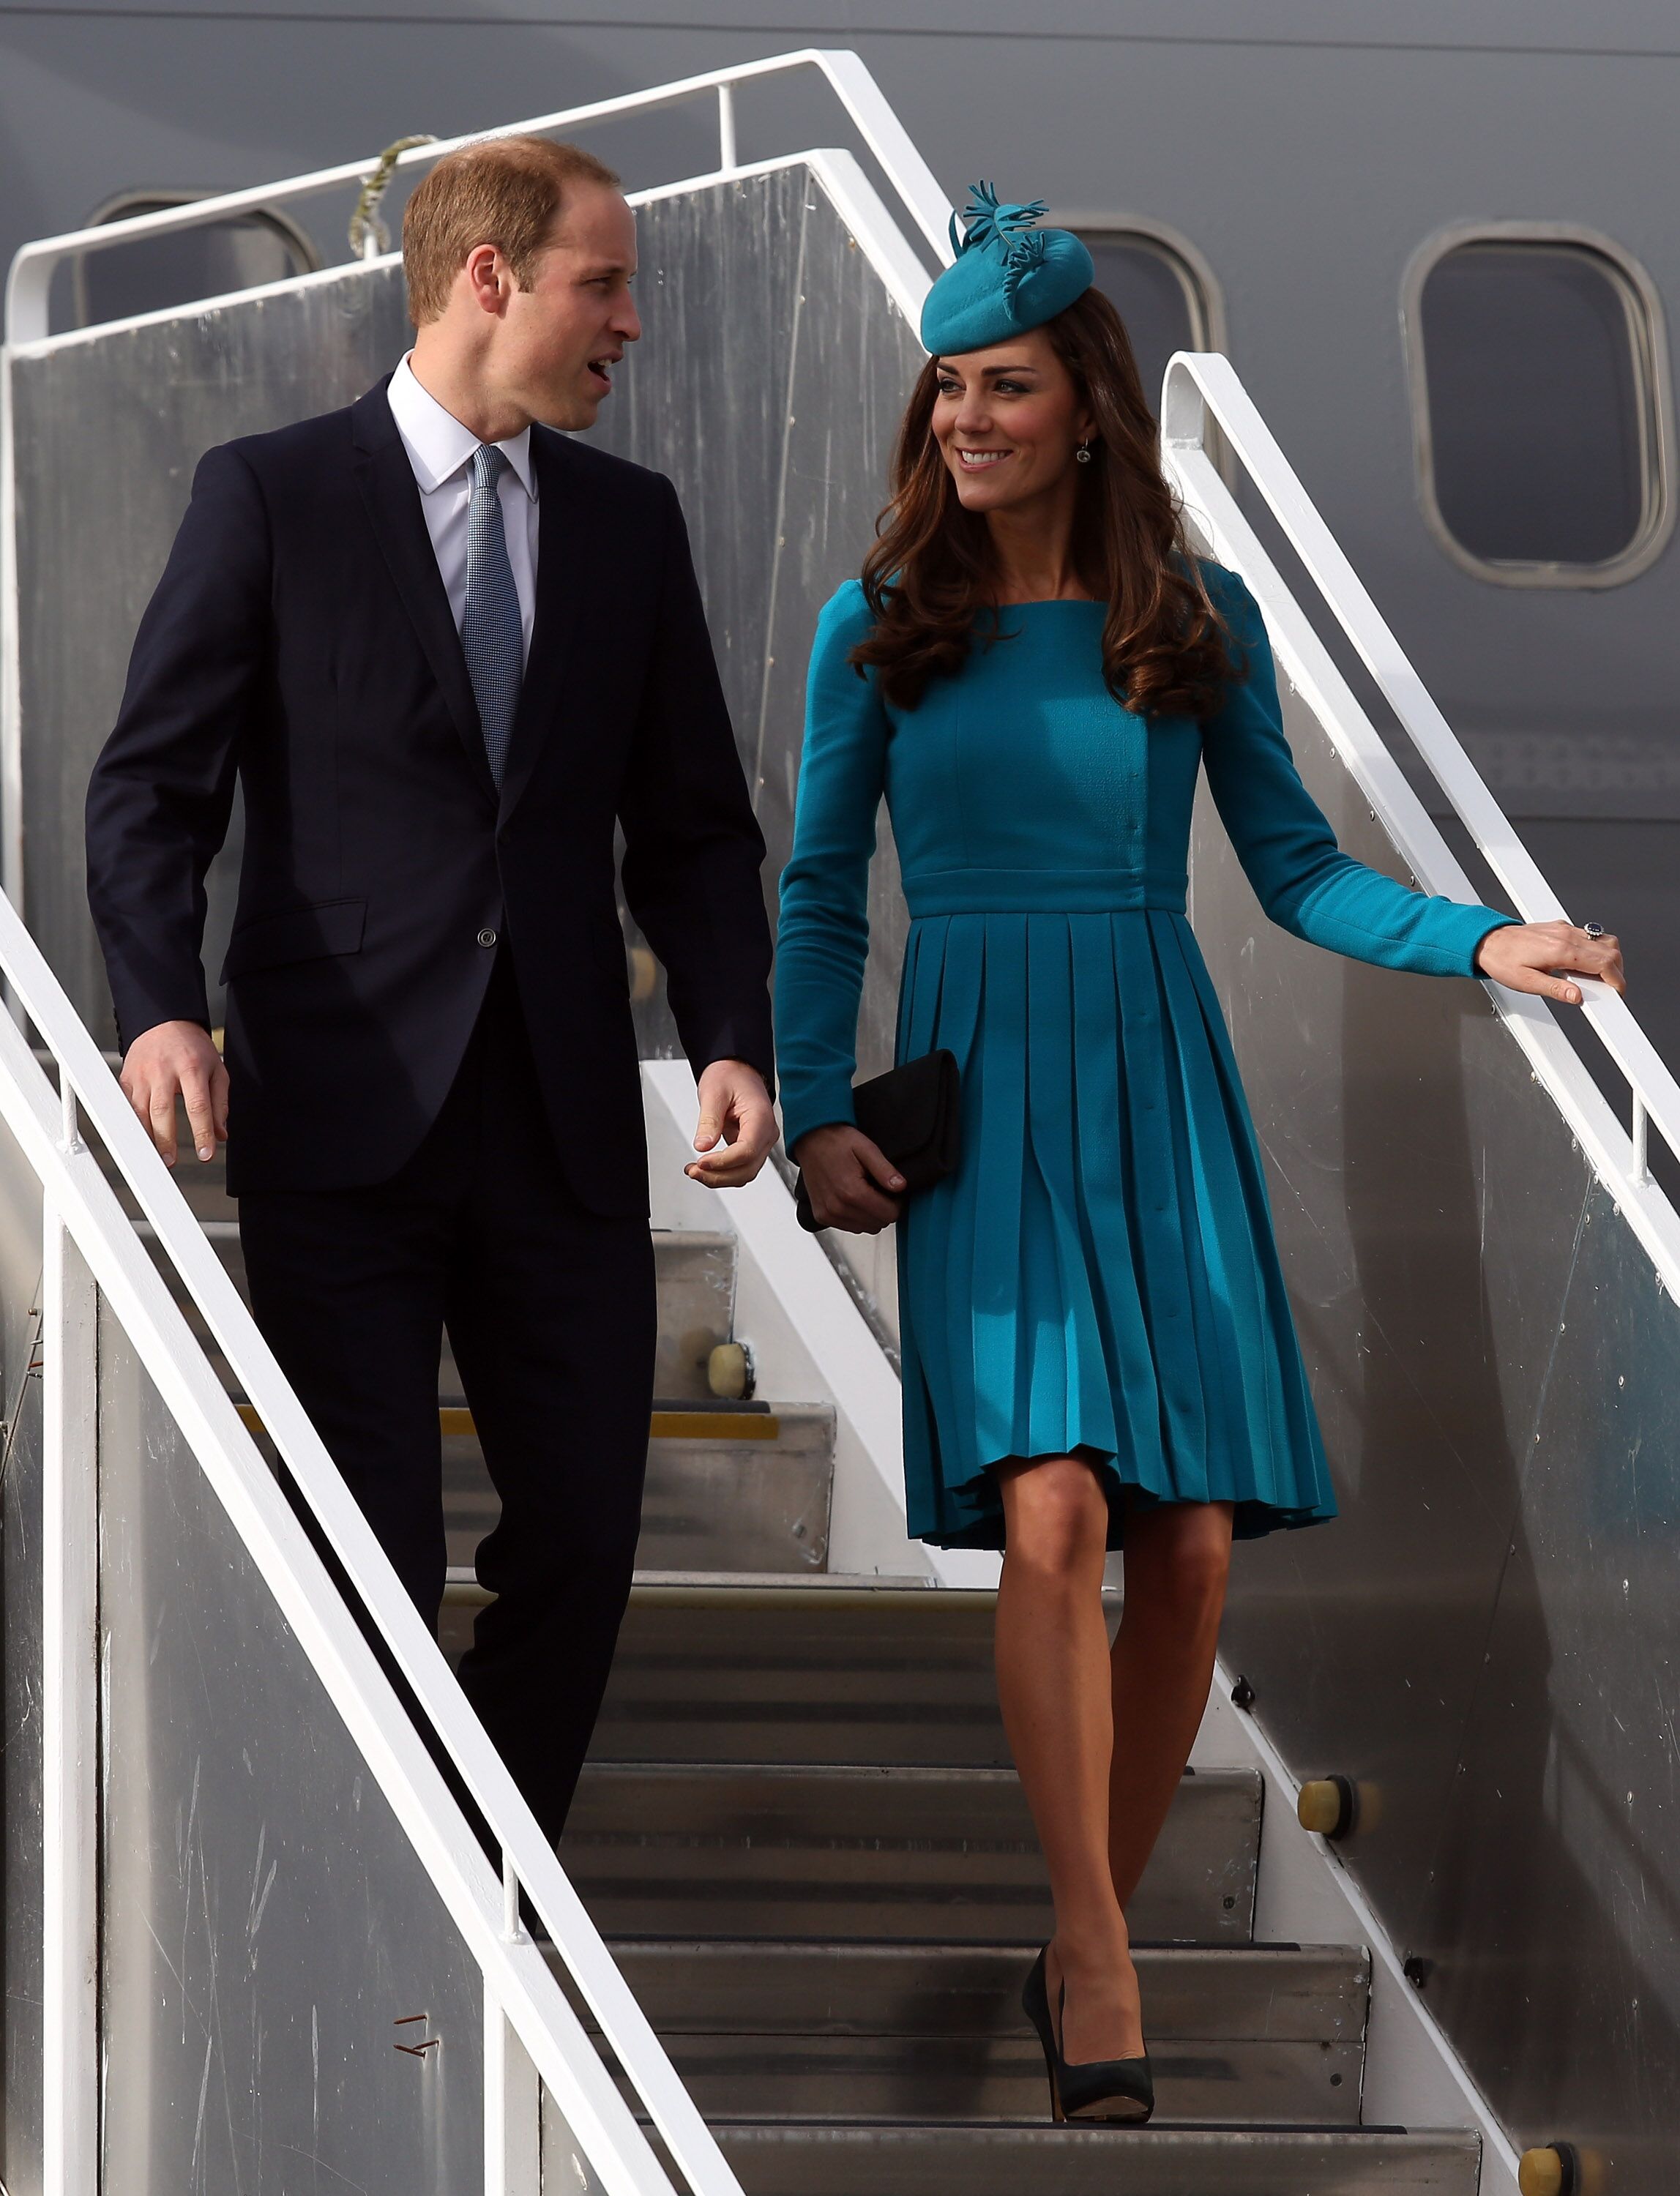  Prince William and Kate arrive at Dunedin International Airport in Dunedin, New Zealand. | Photo: Getty Images